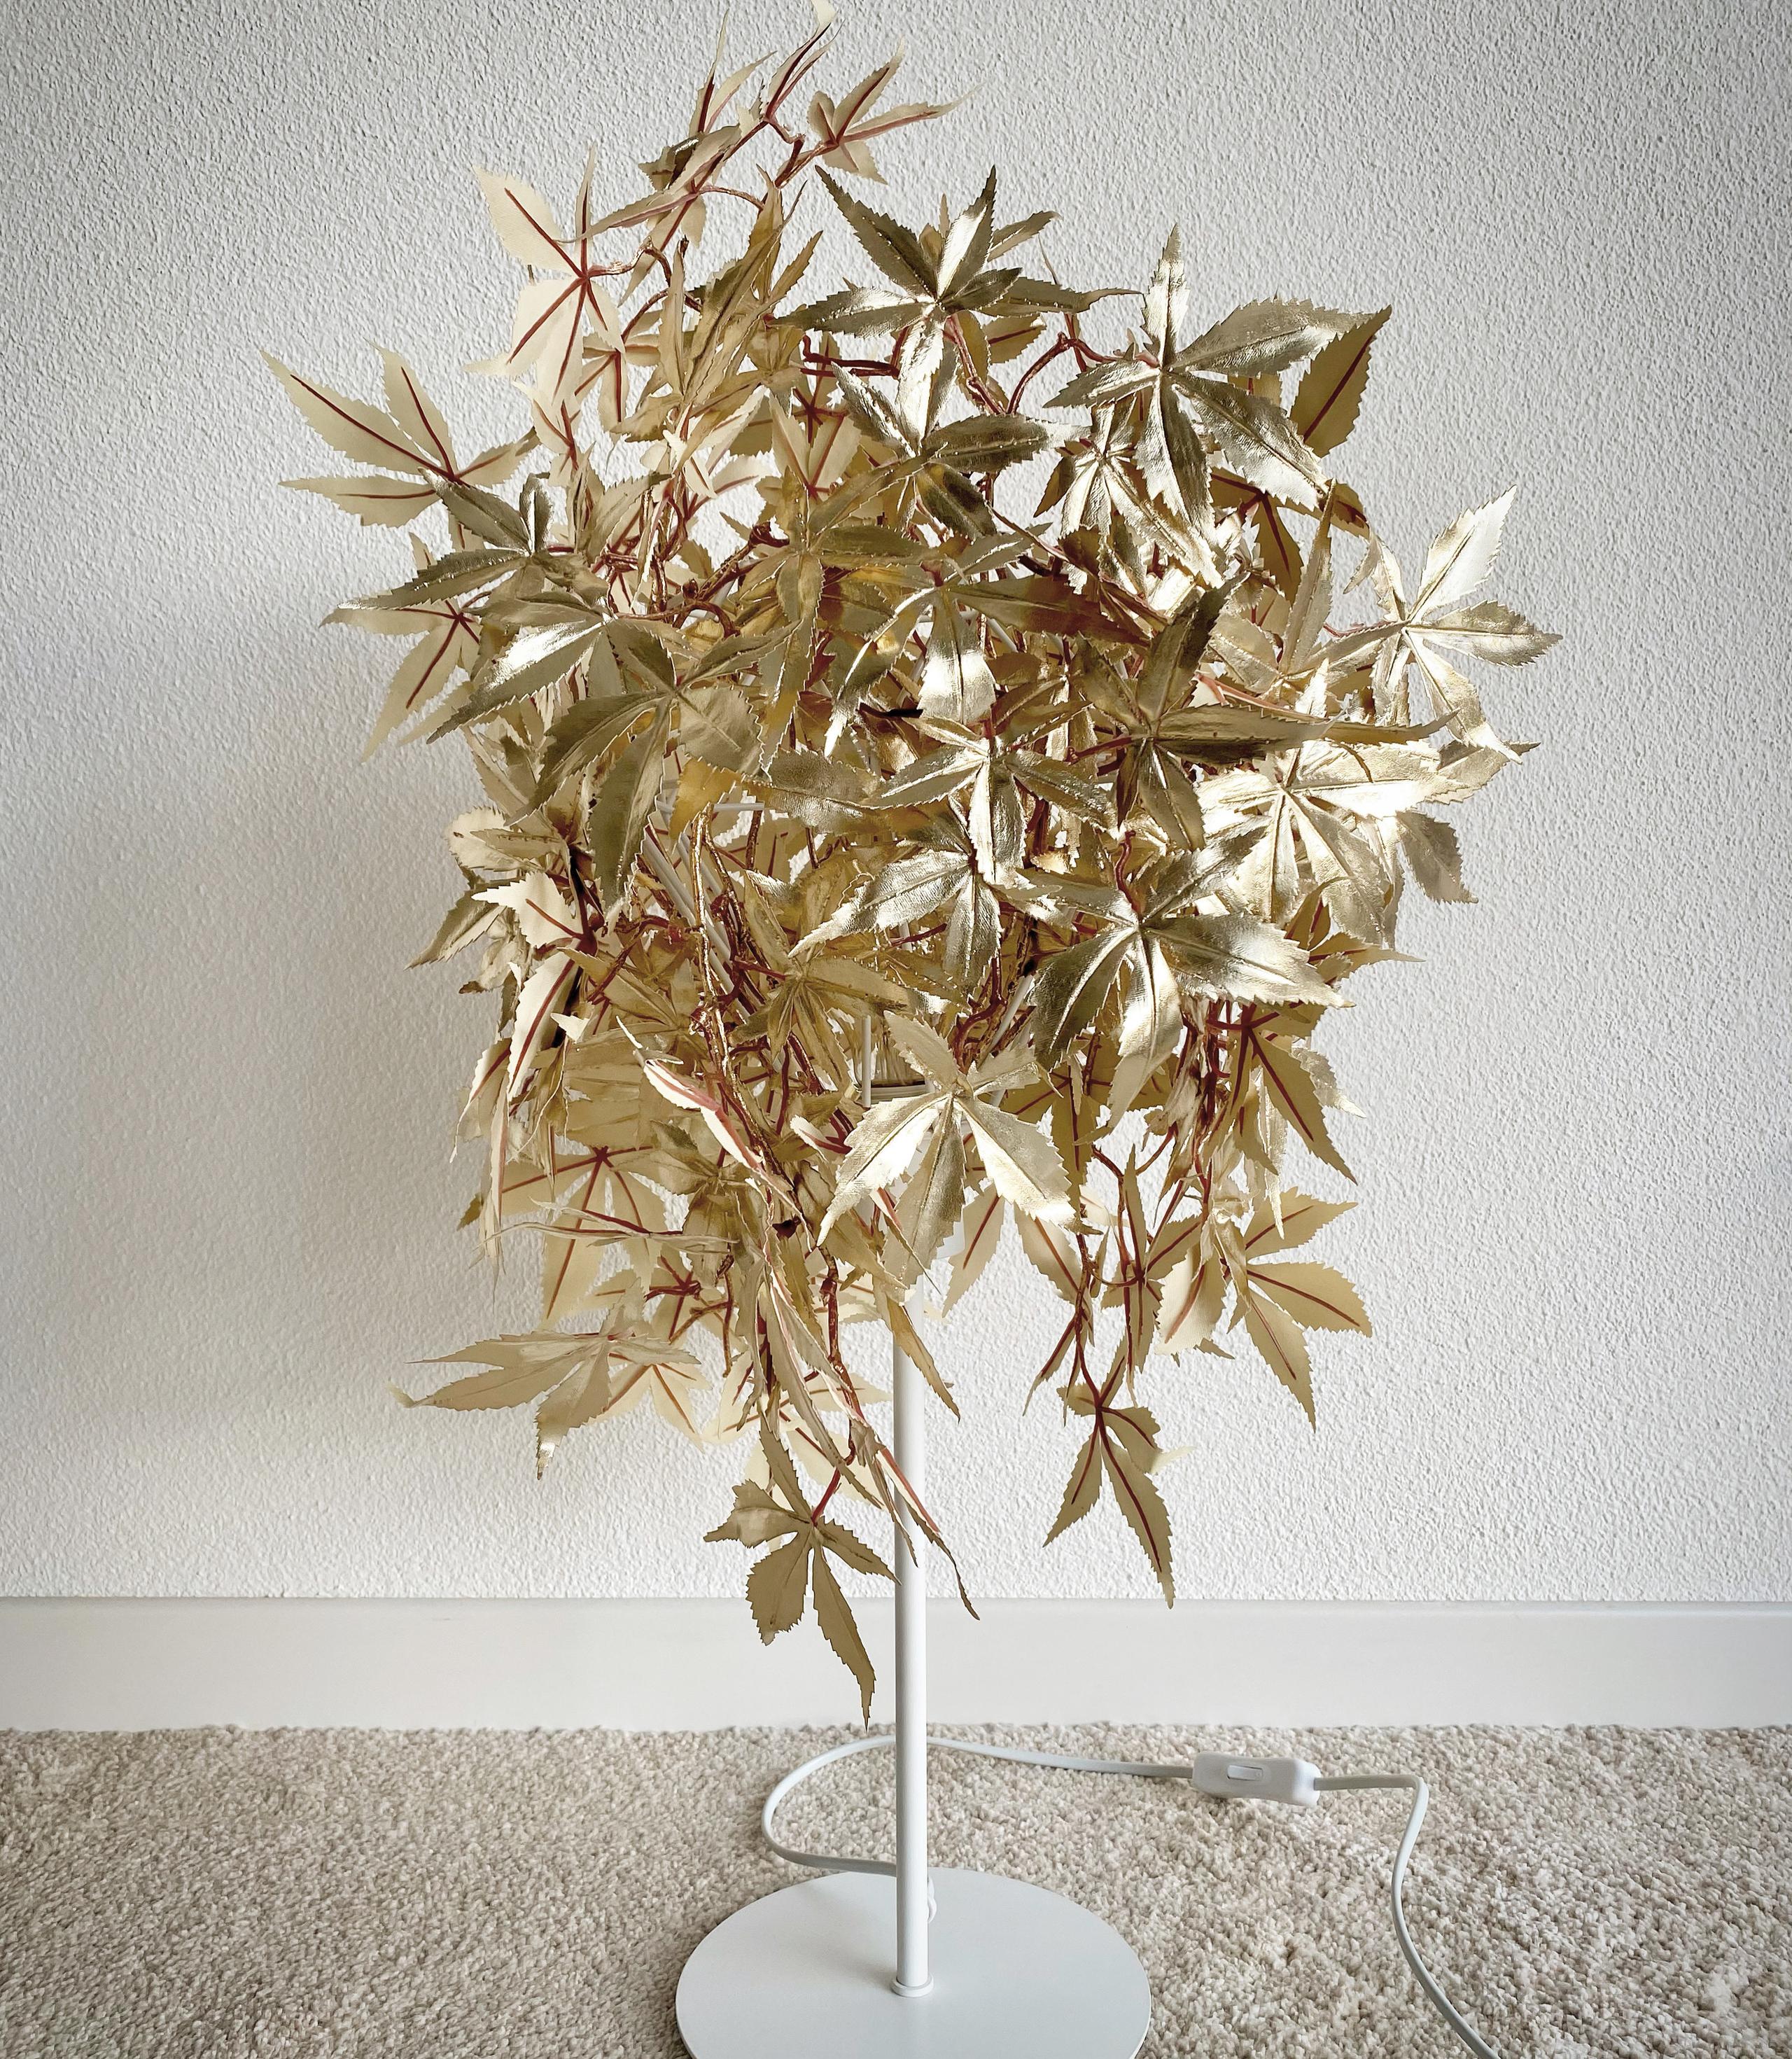 Table Lamp with leaves, Gold White, Elisa Berger Design Studio Lugano,Zurich,Como,Ascona,Furniture,Home Decor,Online Shop,Cozy Eco Chic Style